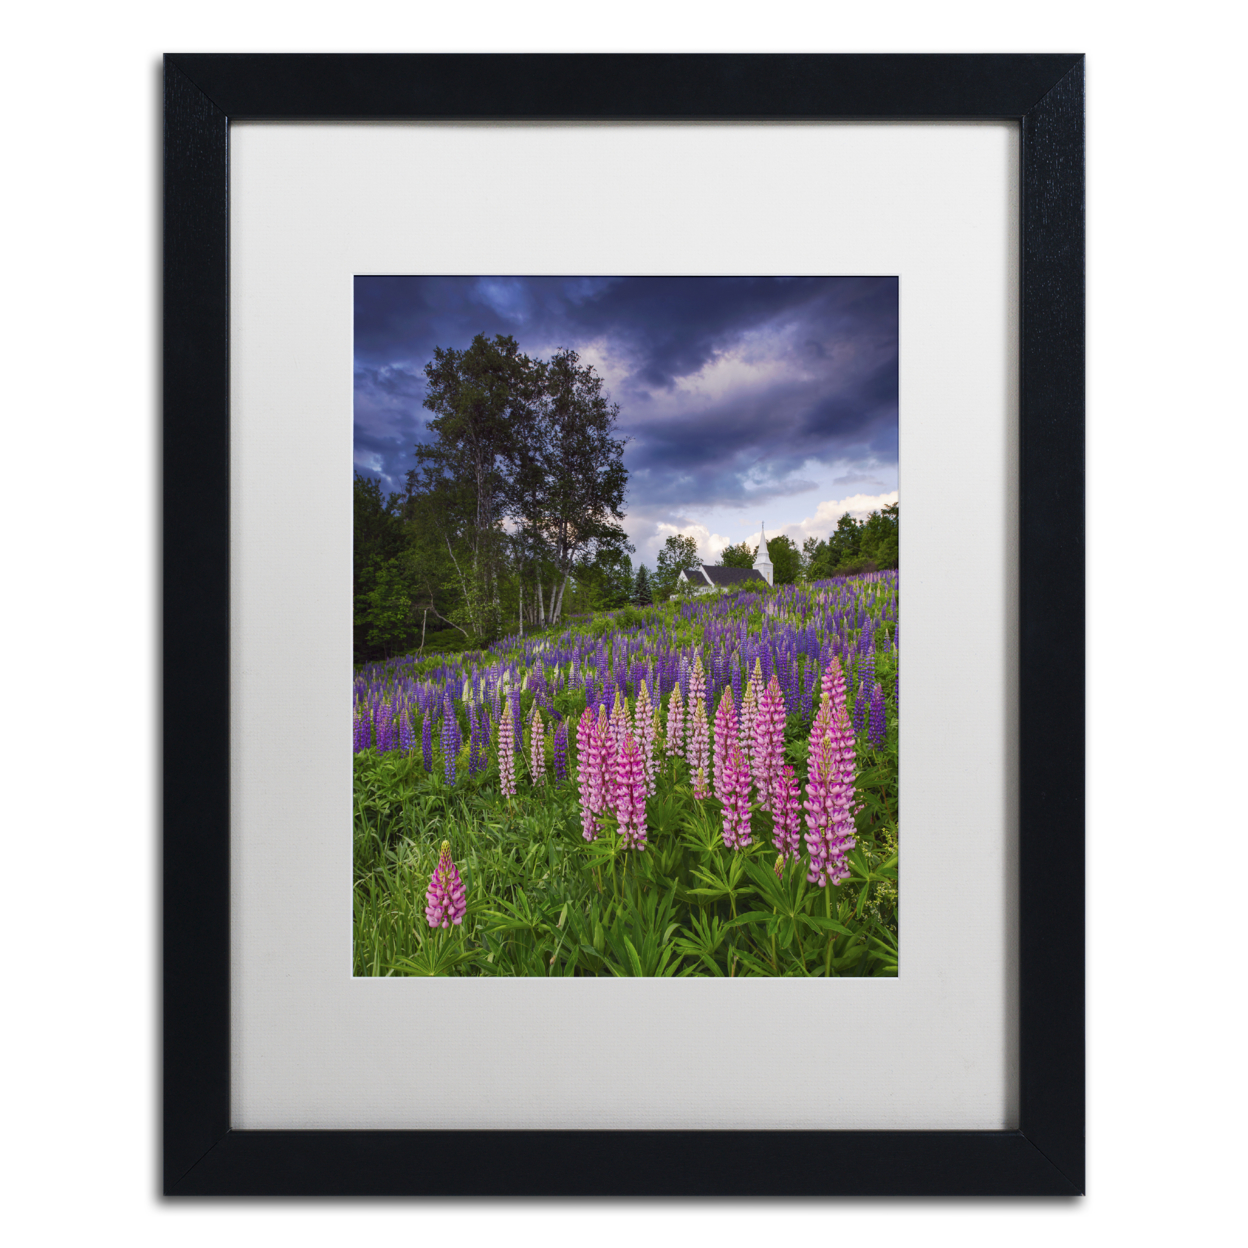 Michael Blanchette Photography 'Lupines On The Hill' Black Wooden Framed Art 18 X 22 Inches